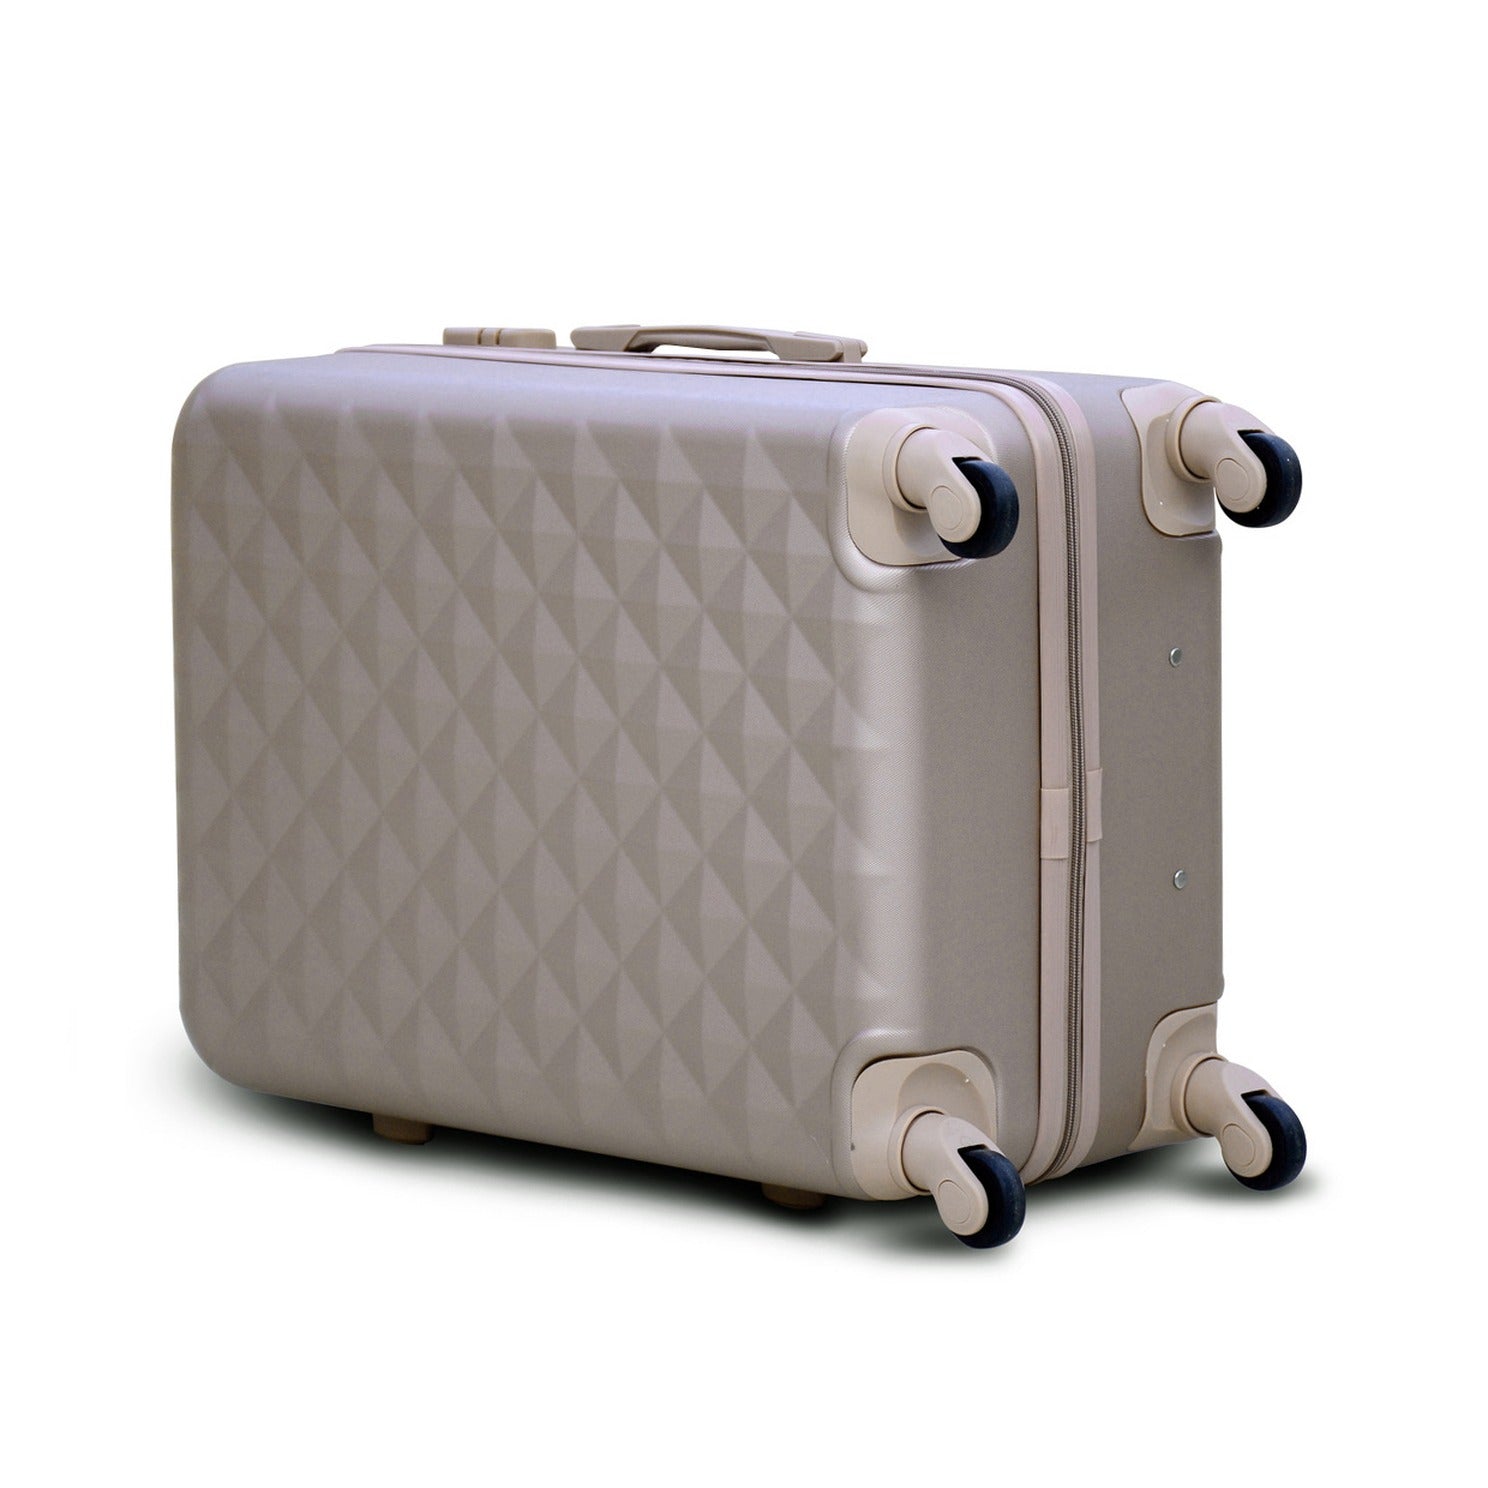 24" Gold Colour Diamond Cut ABS Lightweight Luggage Bag With Spinner Wheel Zaappy.com